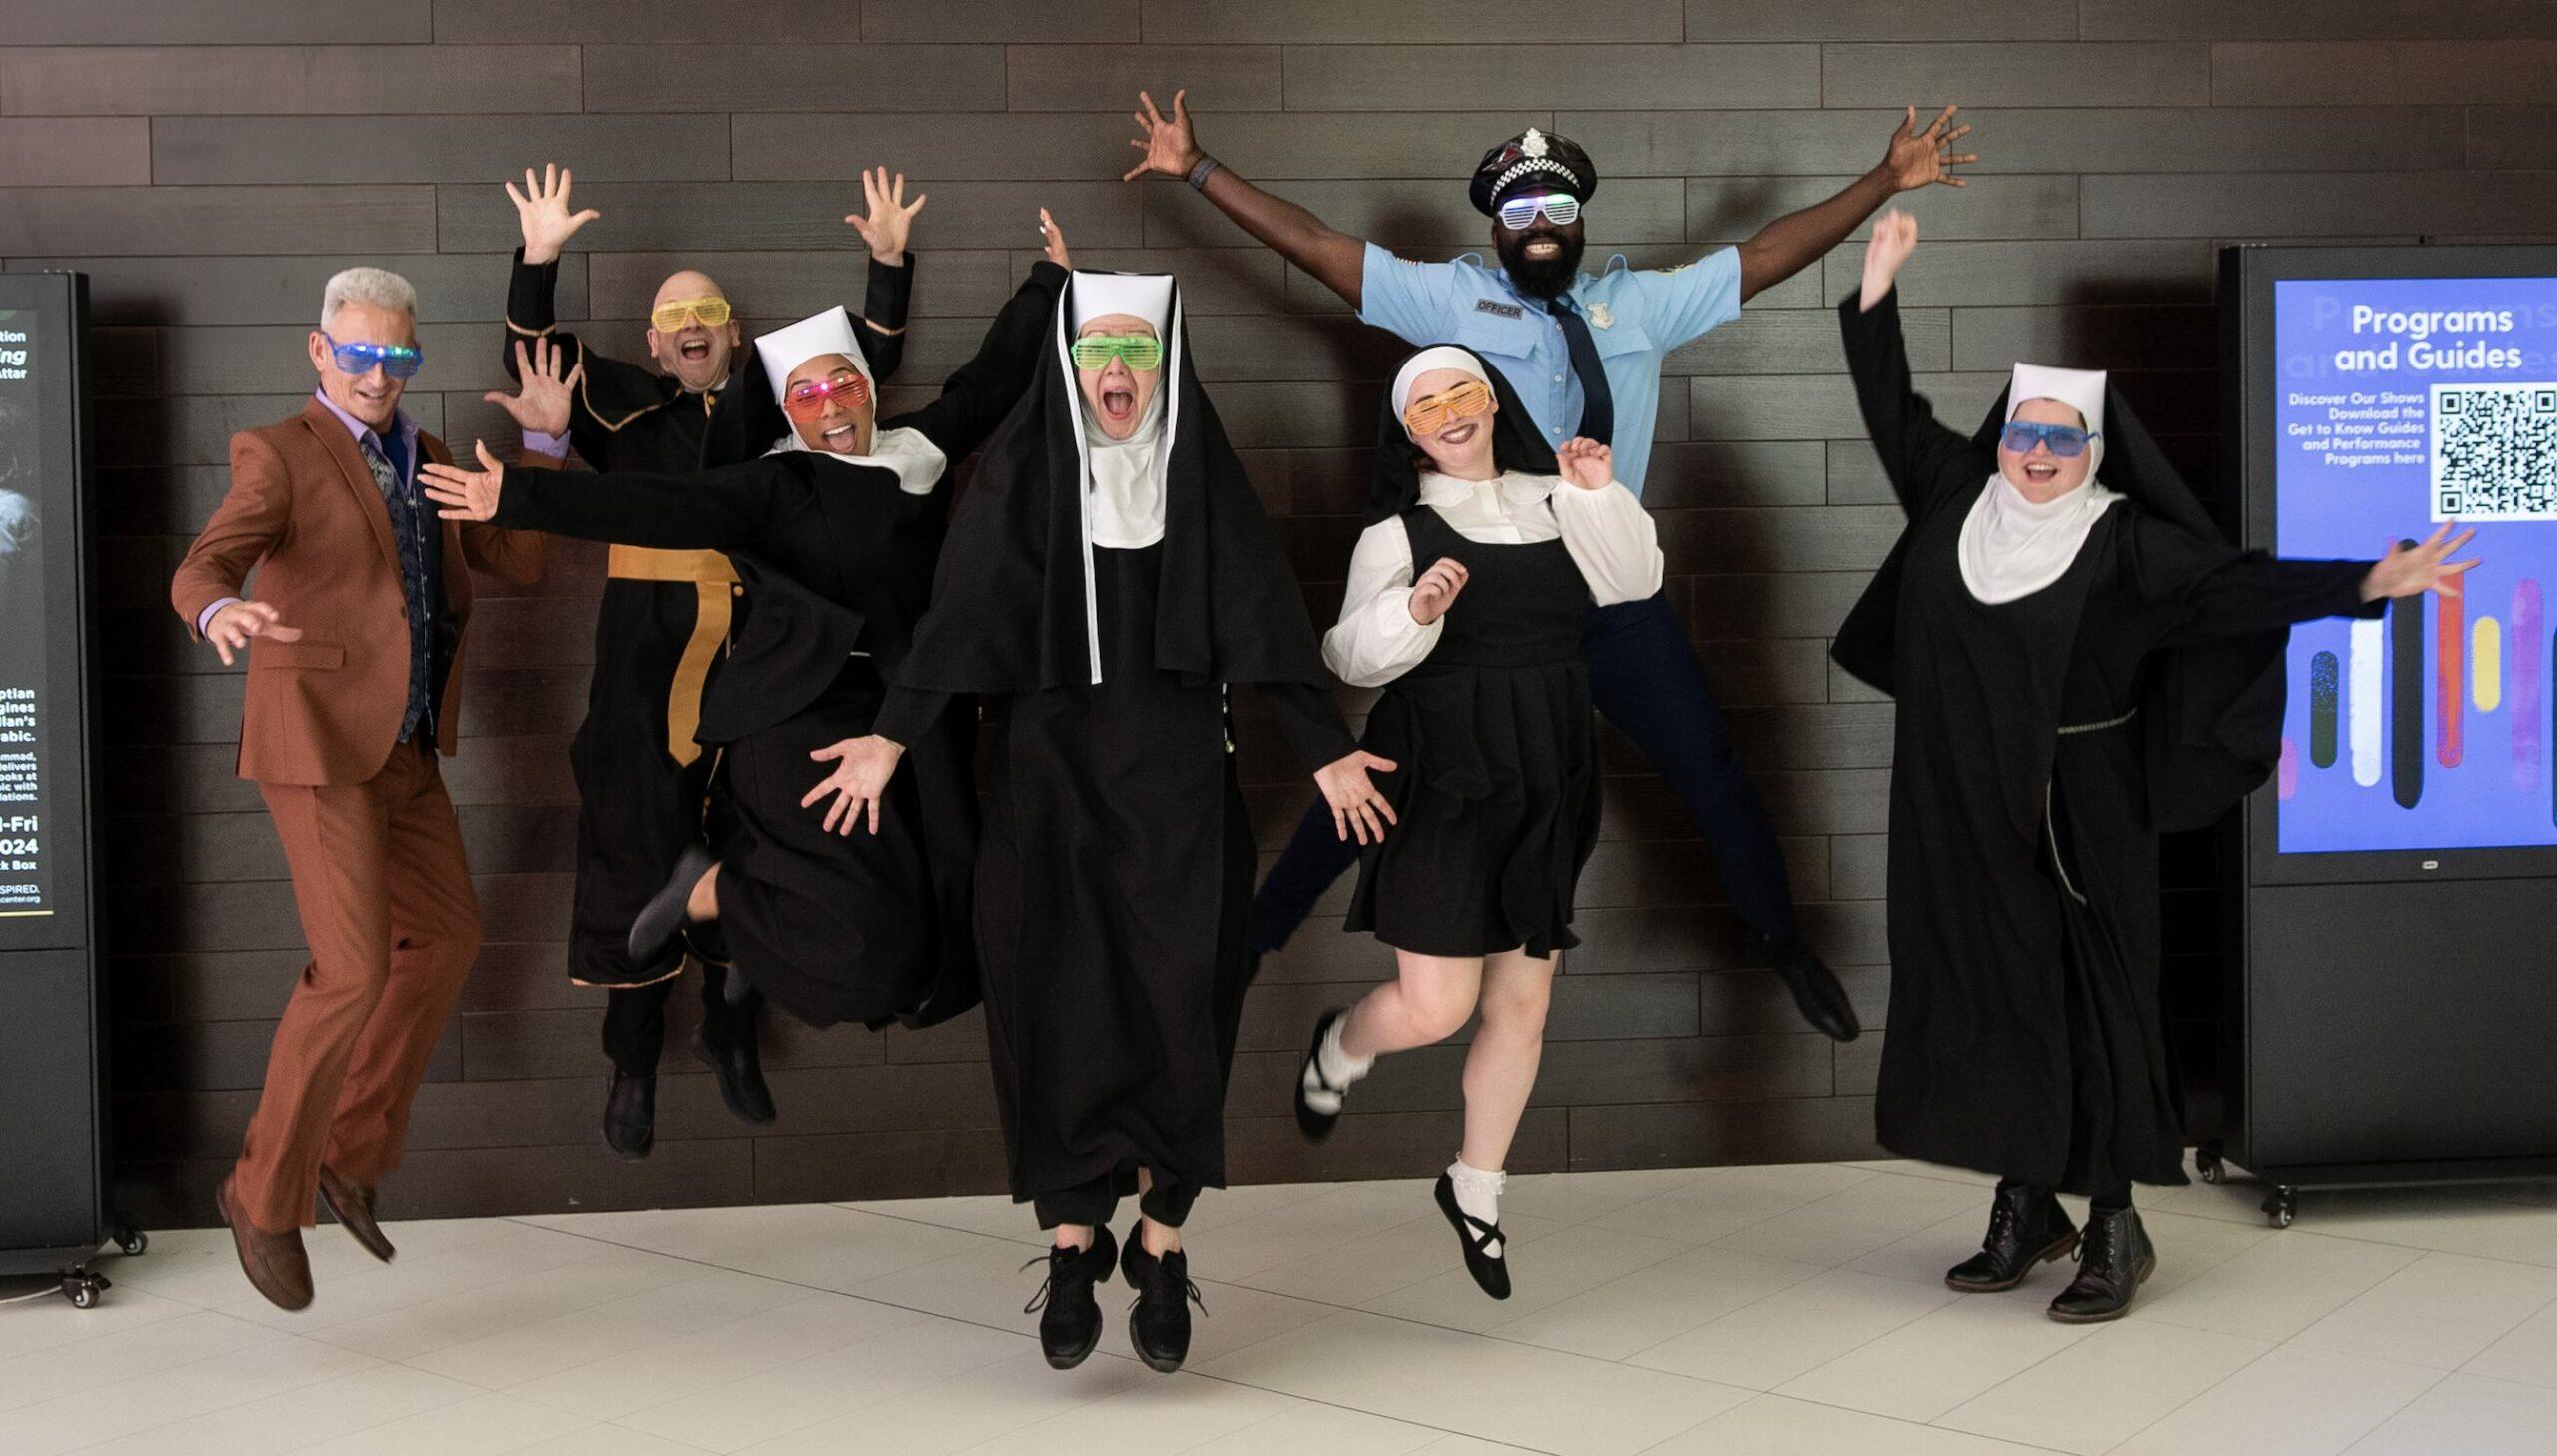 Sister Act: The Musical brings some soul to Abu Dhabi 